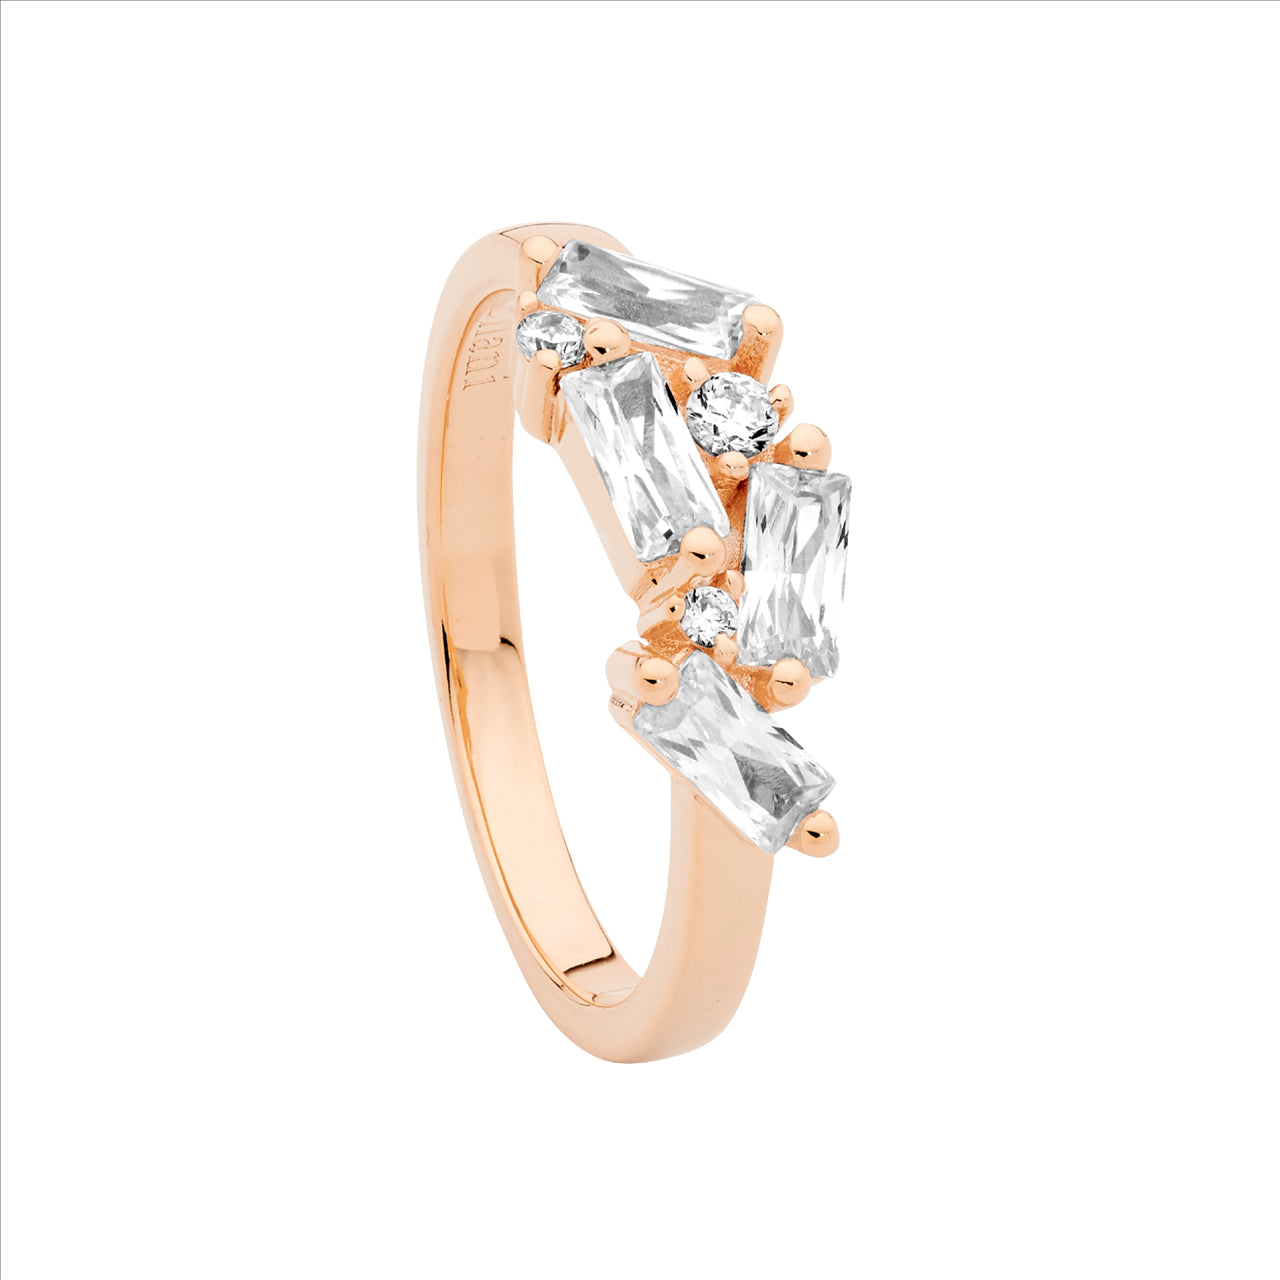 Staggered Cubic Zirconia Dress Ring - Rose Gold.